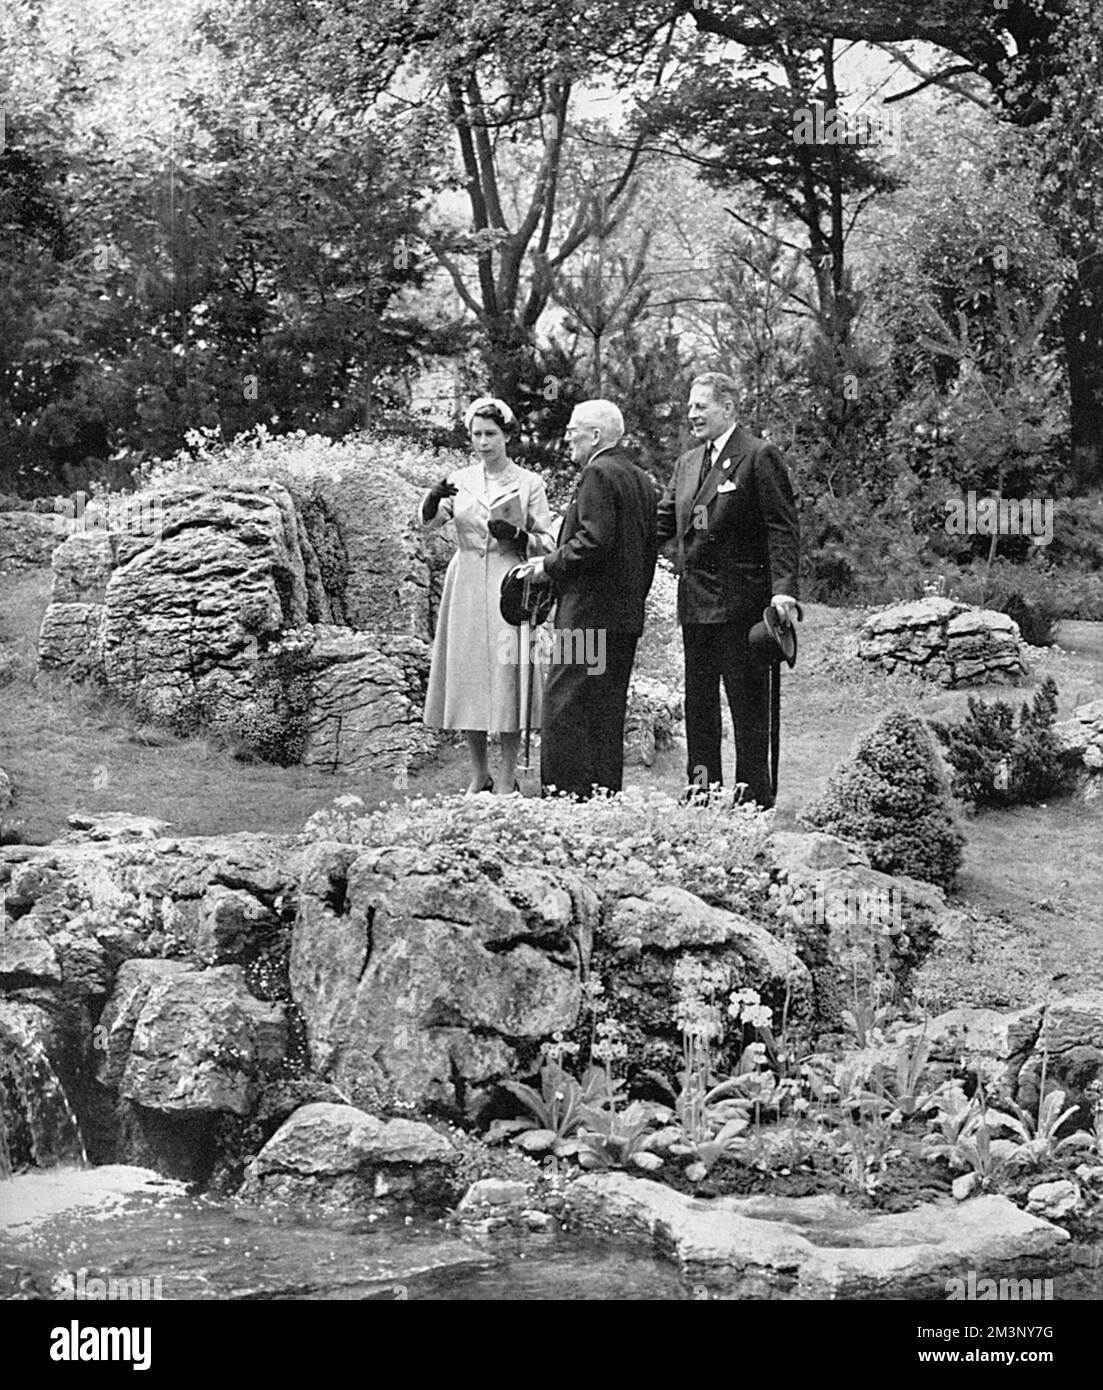 Queen Elizabeth II visiting the Chelsea Flower Show in 1955, inspecting a rock garden feature that has taken her attention.  She is conducted around the show by her maternal uncle, the Hon. David Bowes-Lyon.     Date: 1955 Stock Photo